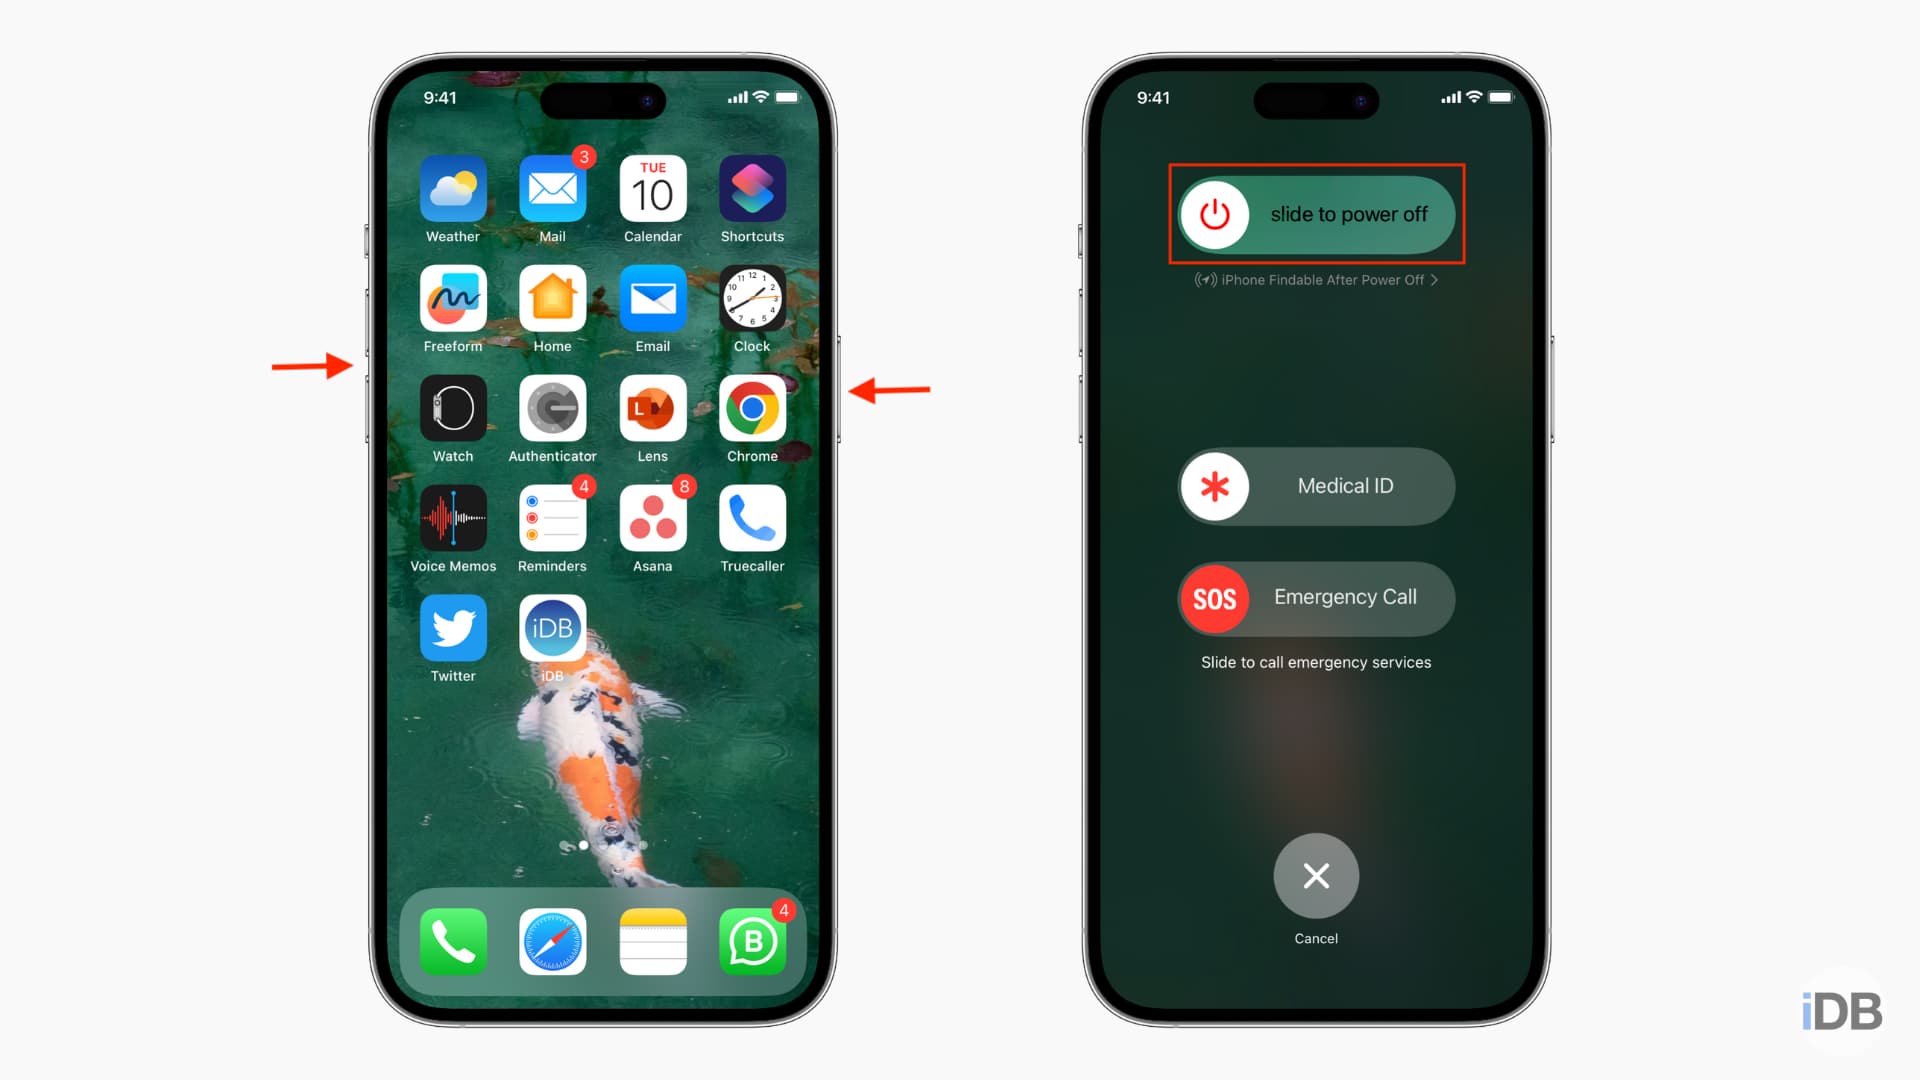 Turn off iPhone with Face ID